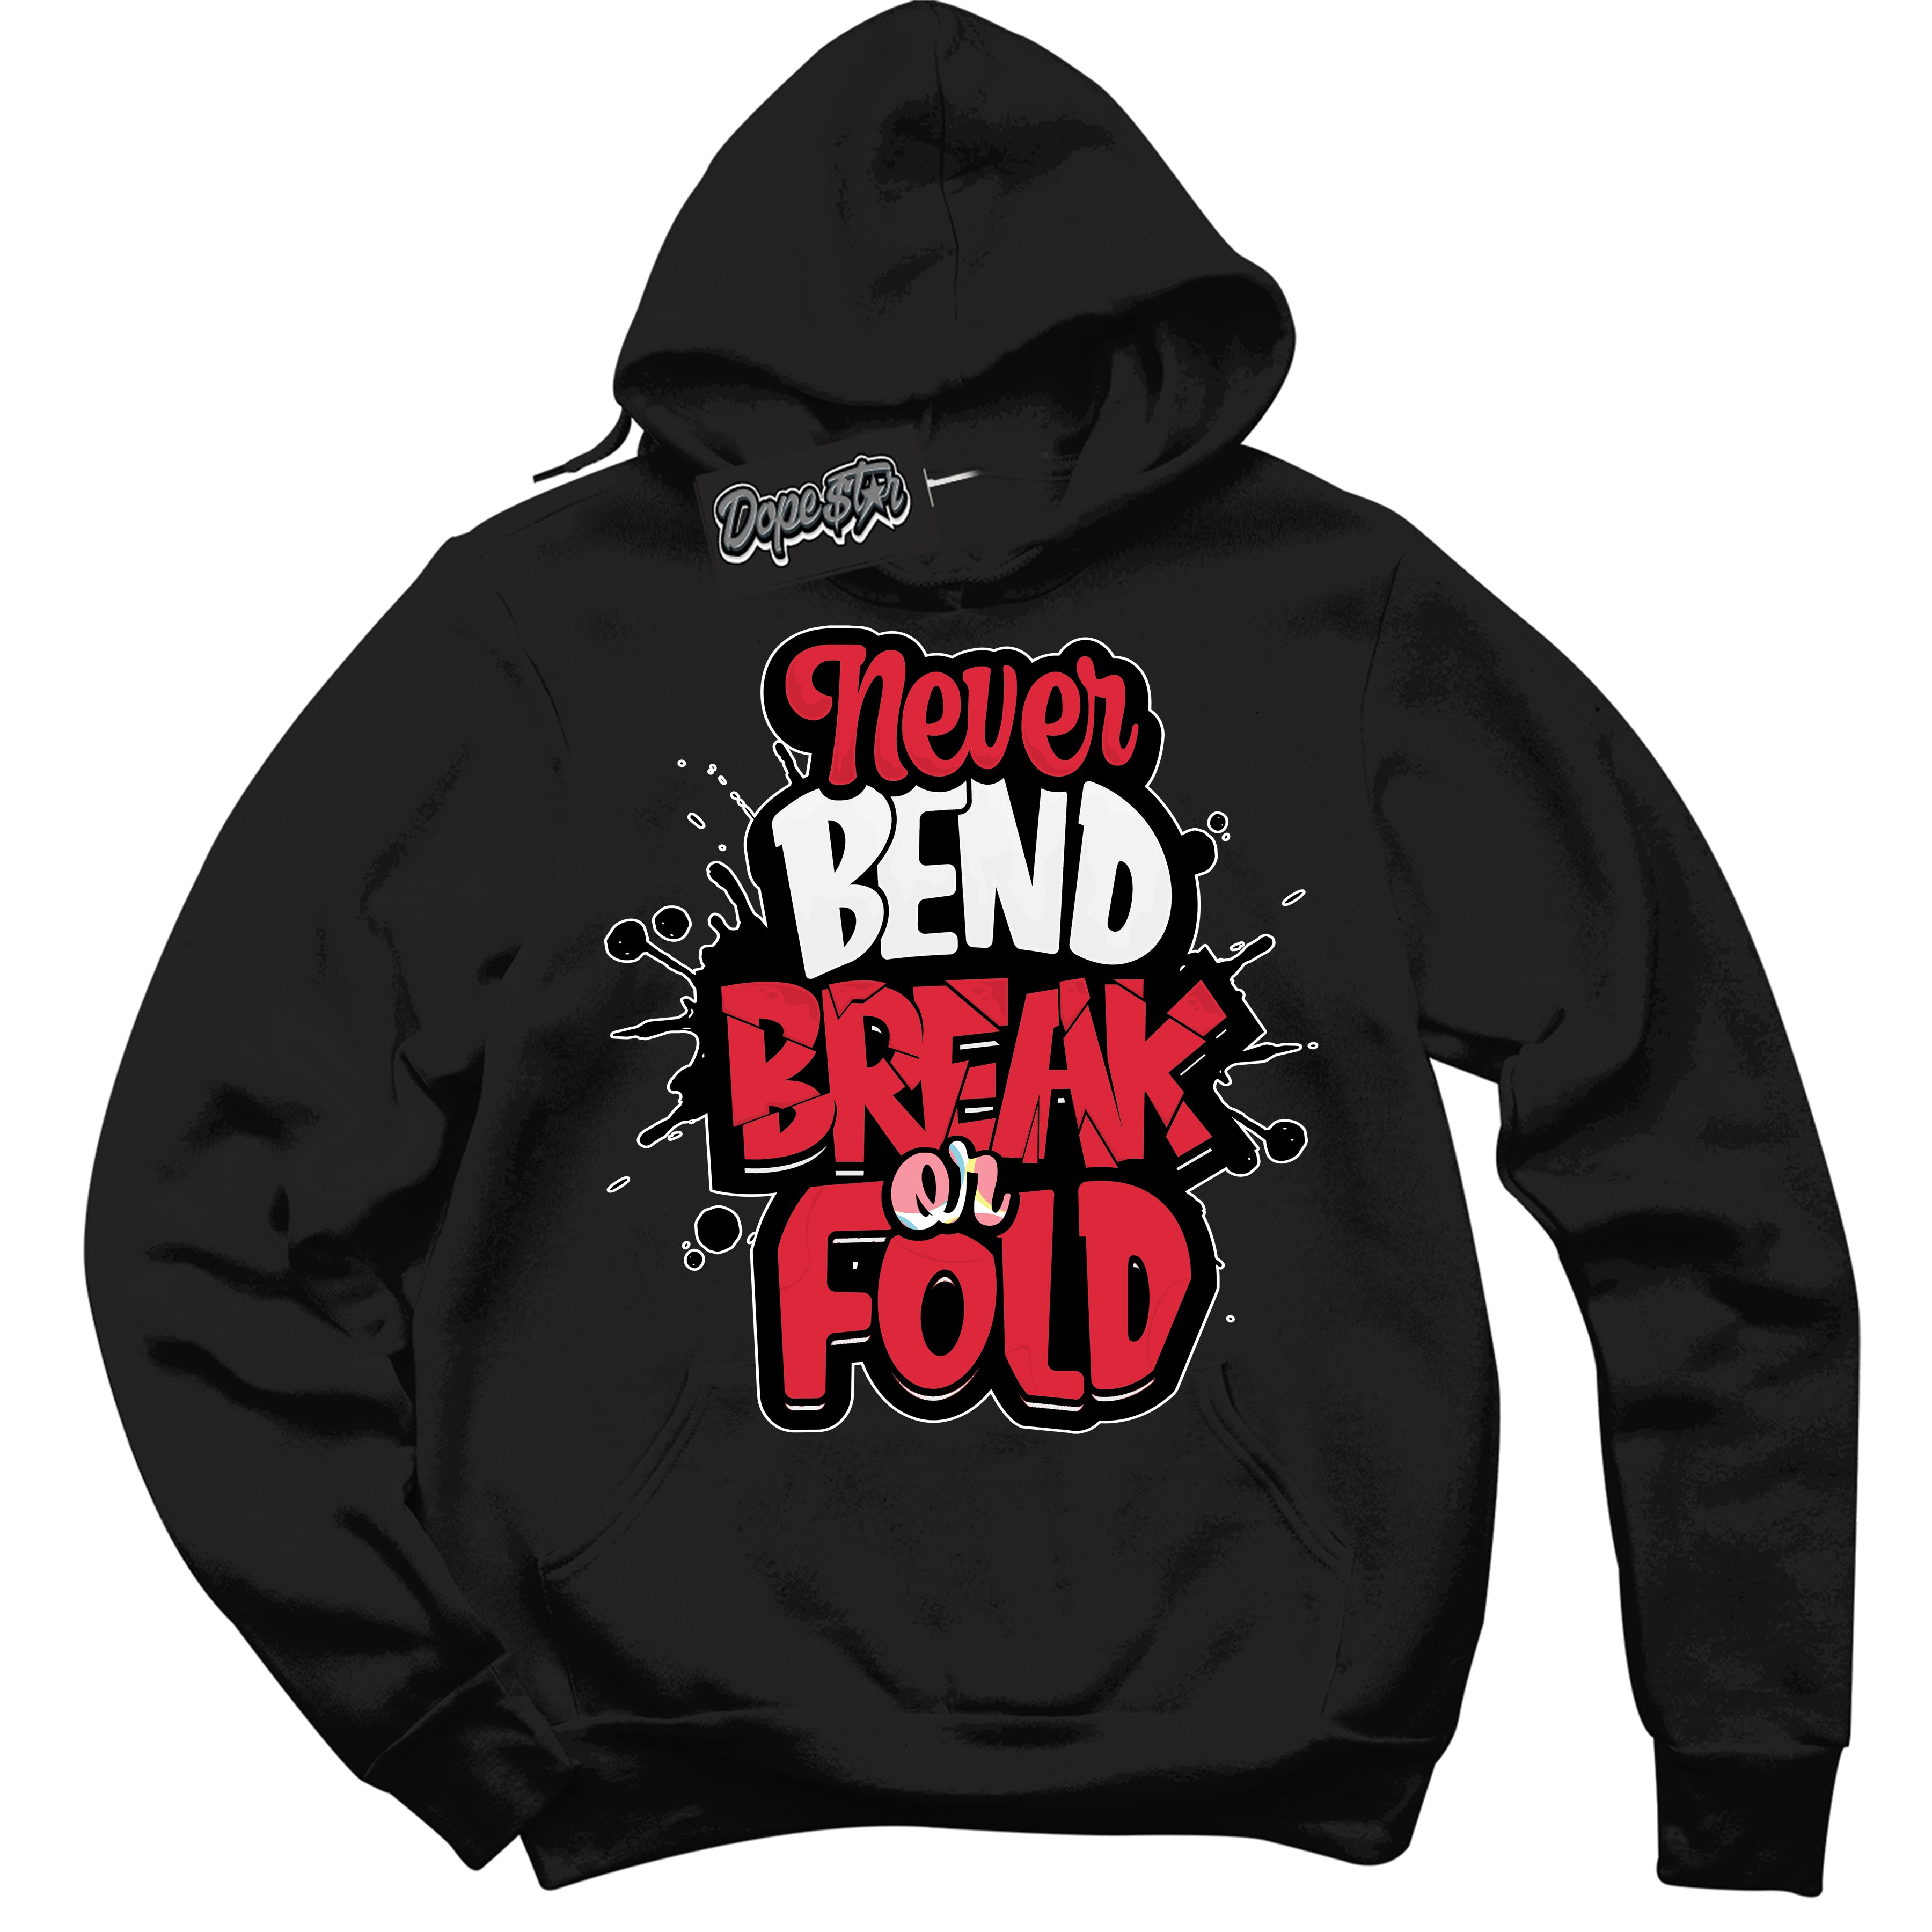 Cool Black Graphic DopeStar Hoodie with “ Never Bend Break Or Fold “ print, that perfectly matches Spider-Verse 1s sneakers